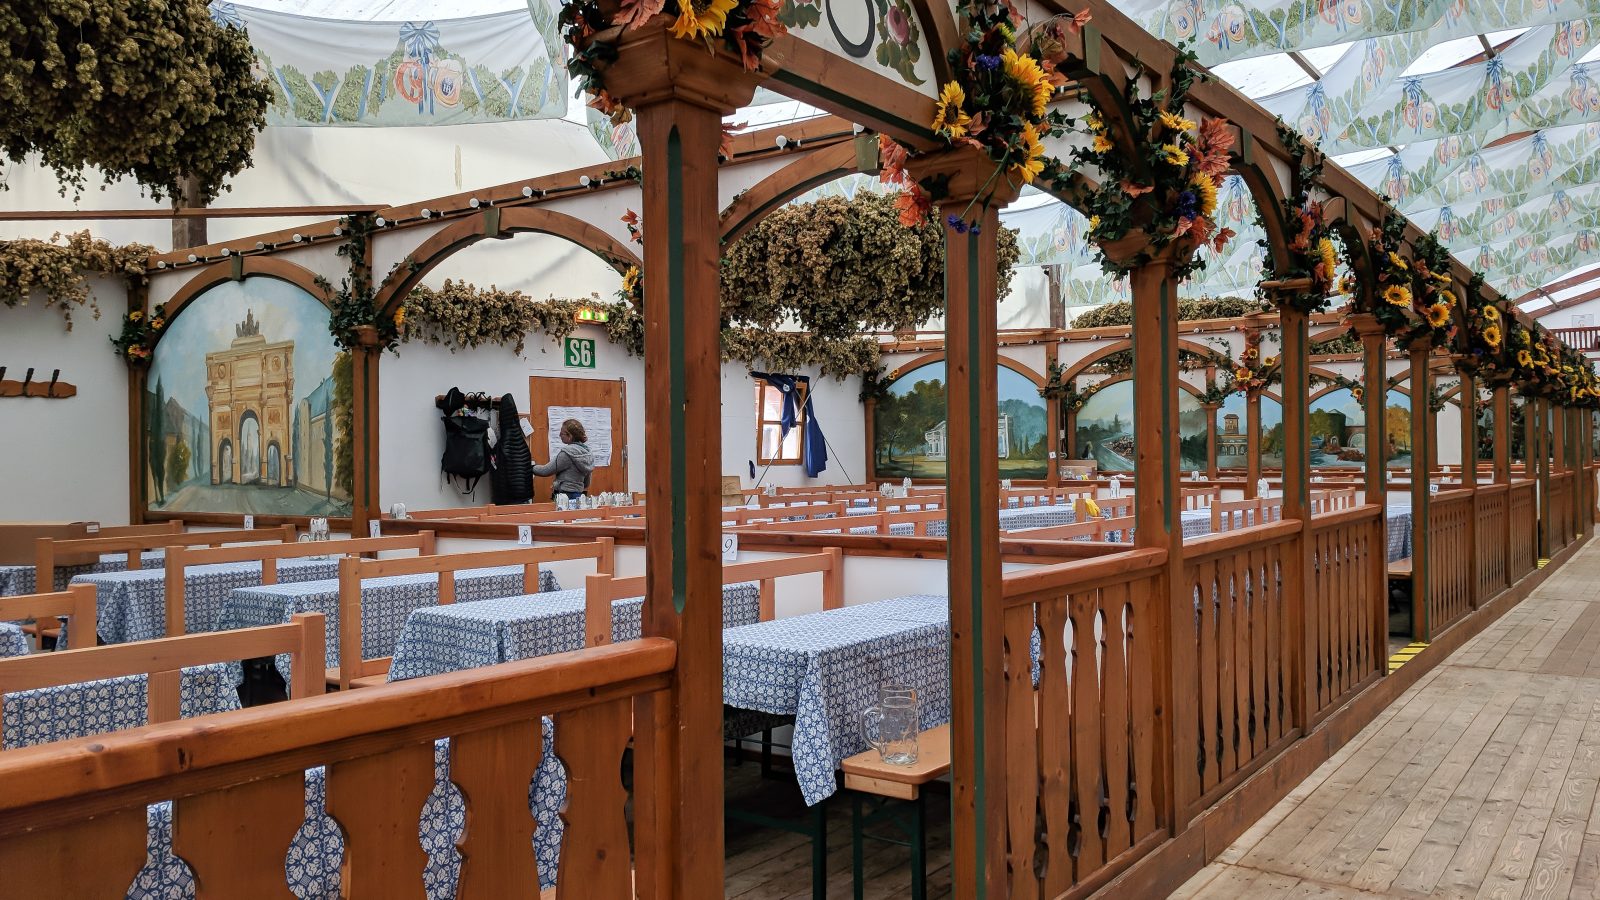 How to decorate for an Oktoberfest party at home / Backyard Beerfest / Backyard Bierfest / At-Home Oktoberfest / Oktoberfest party decorations #oktoberfest #partyideas #munich #germany #bavaria #backyardparty #mywanderlustylife